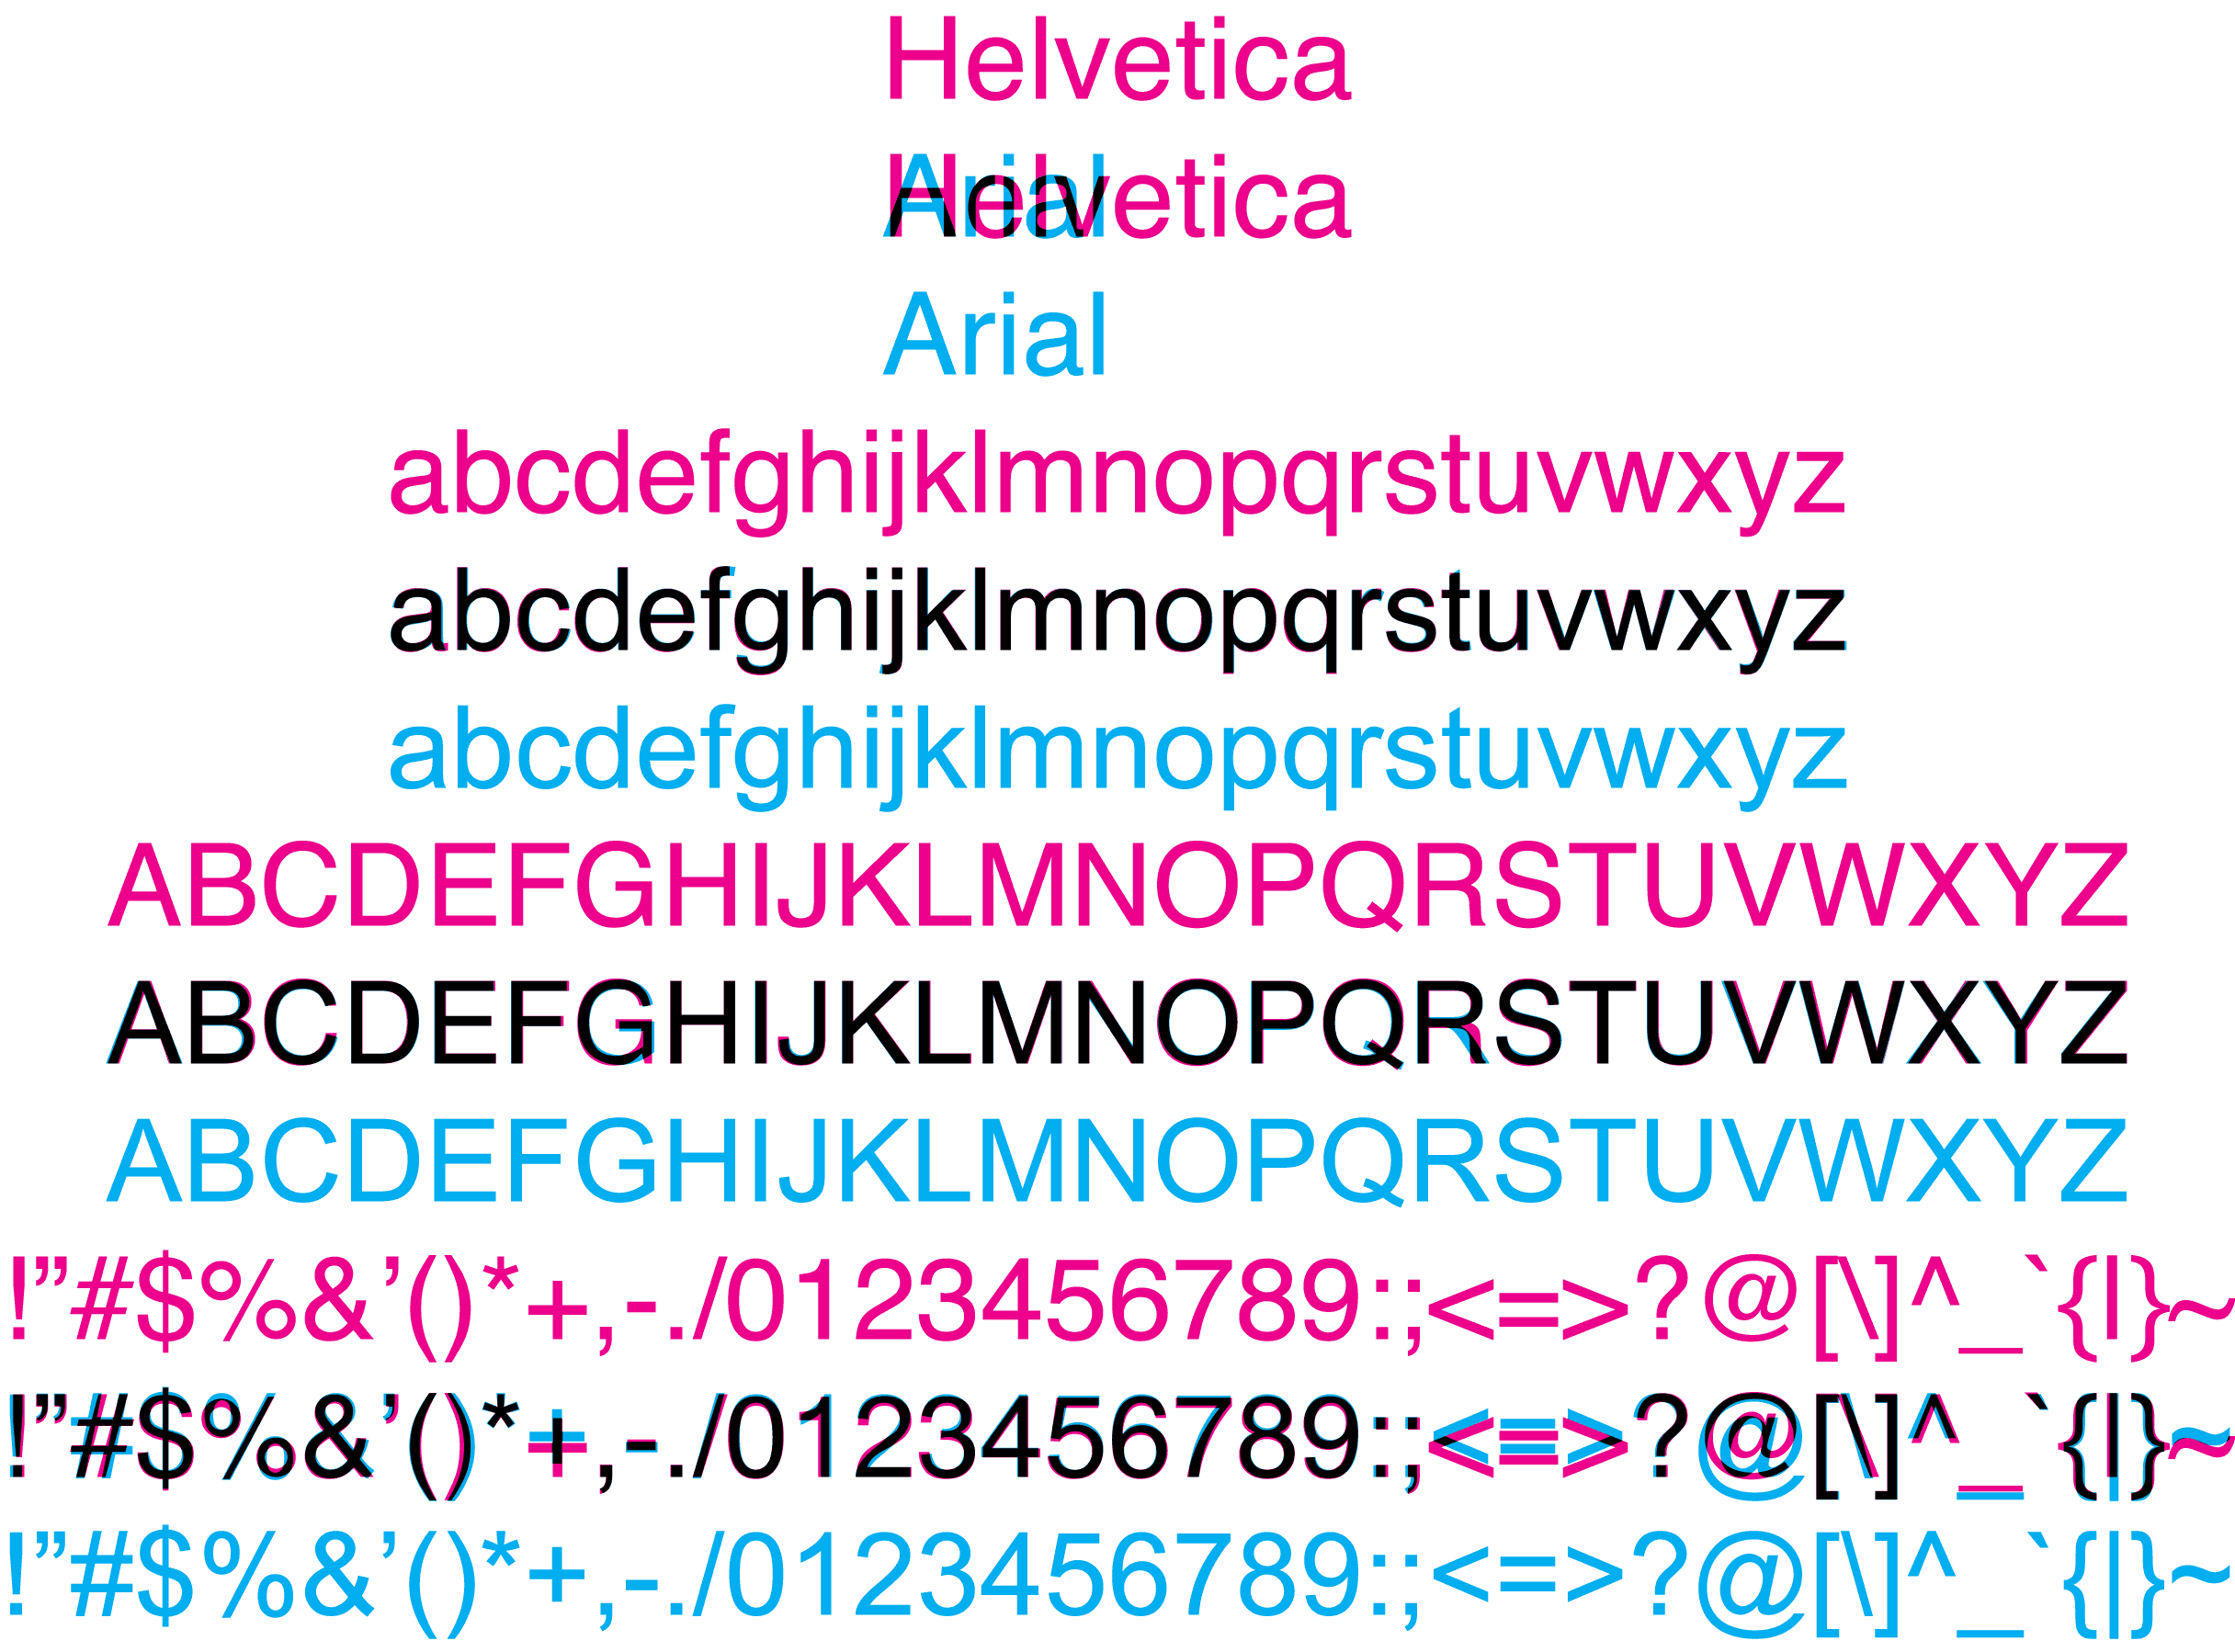 the-difference-between-arial-helvetica-reddit